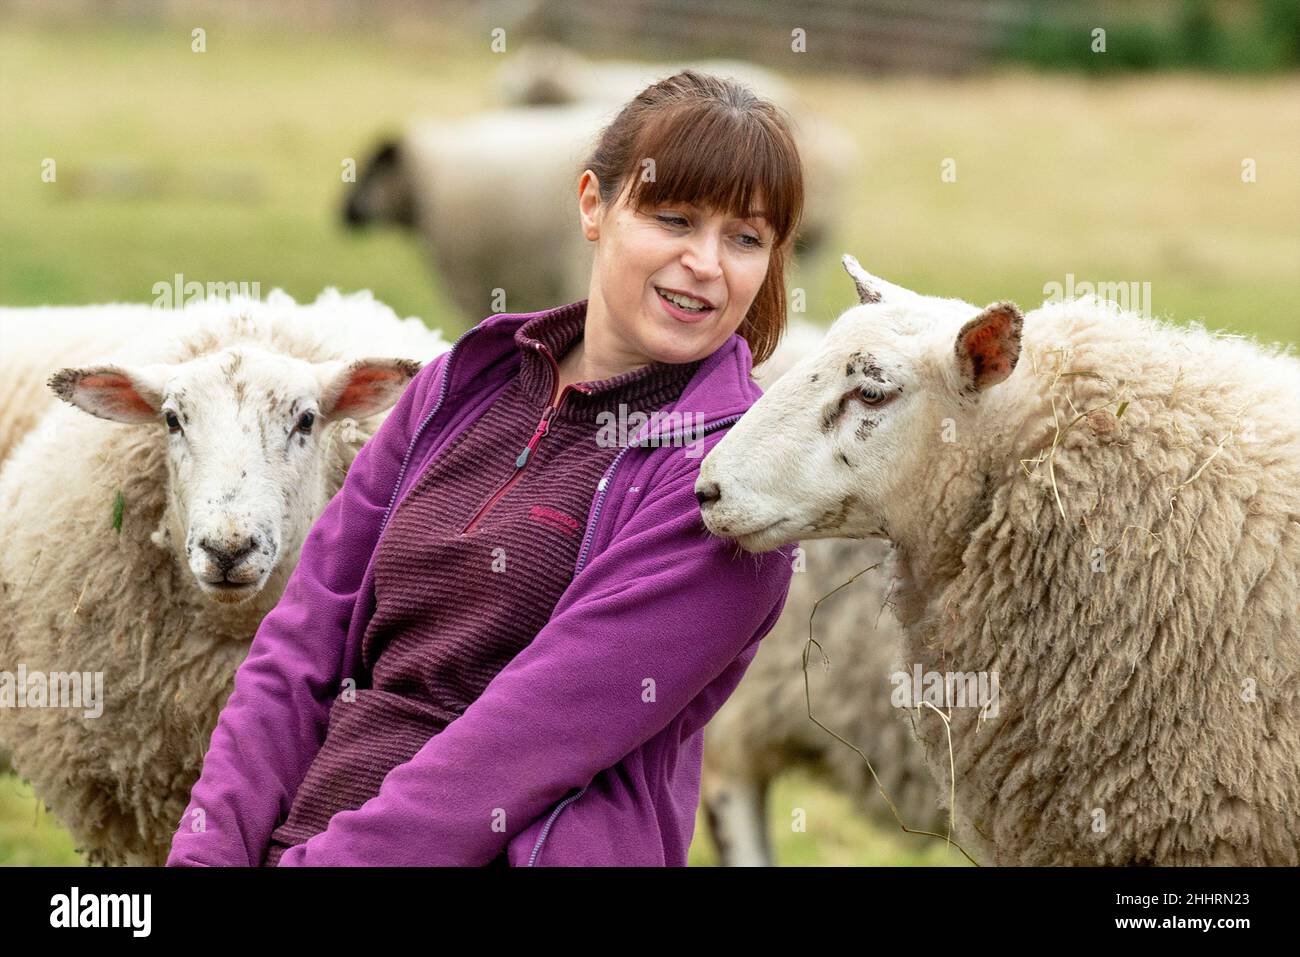 The Vegan Shepherdess.  Images of a woman in northern Scotland who cares for a small flock of sheep, many of which have age and health issues. Stock Photo